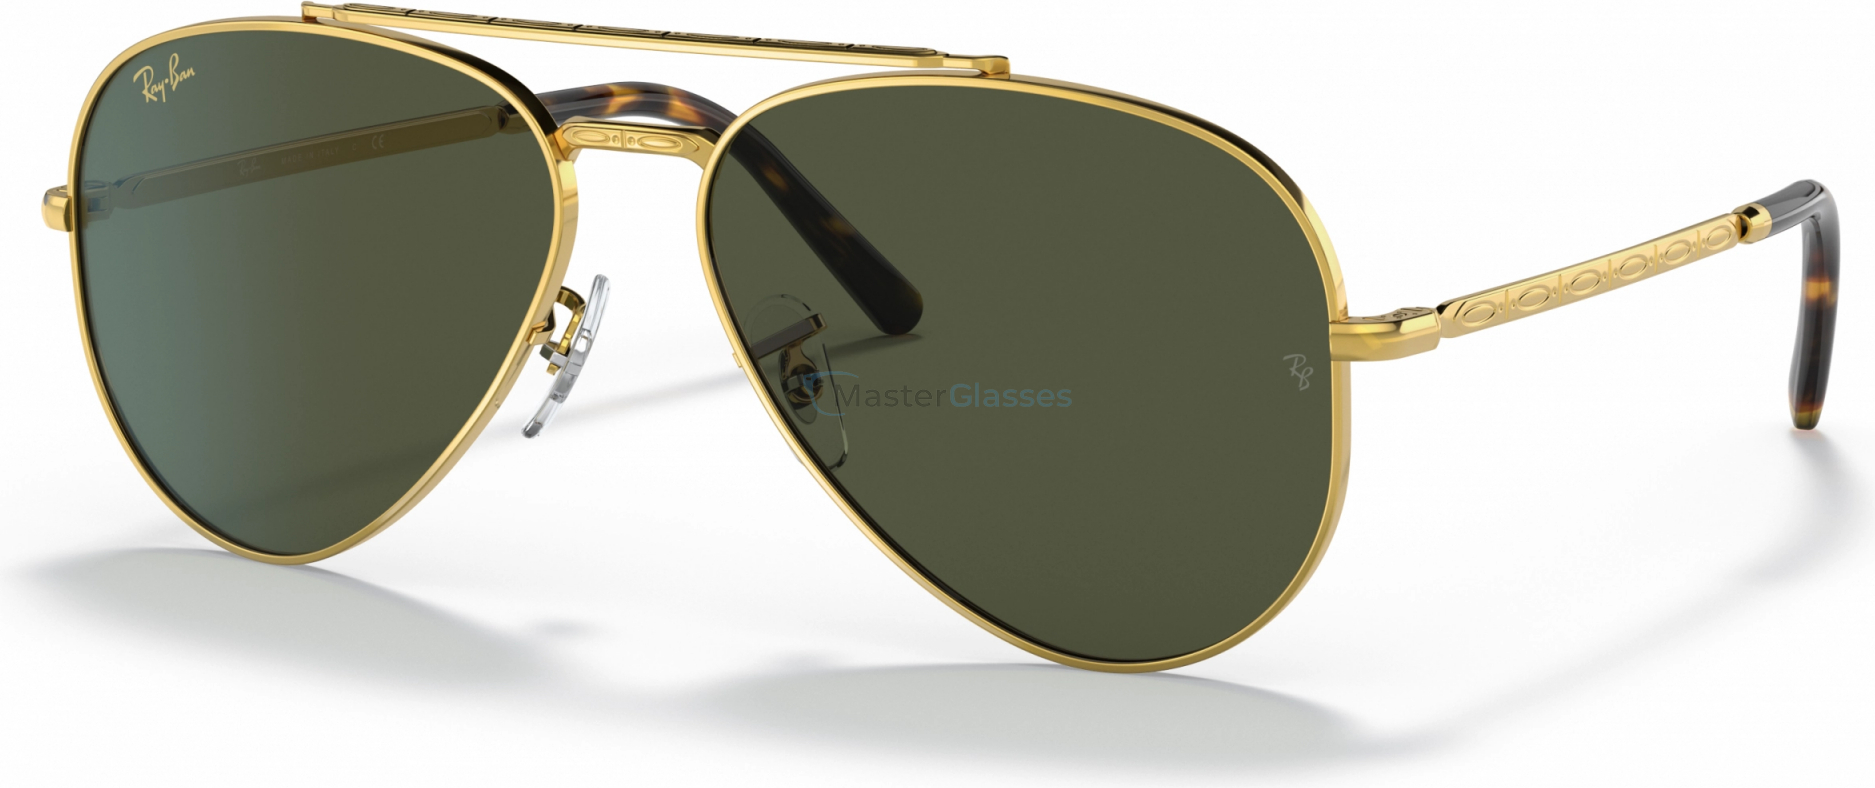   Ray-Ban Aviator RB3625 919631 Legend Gold